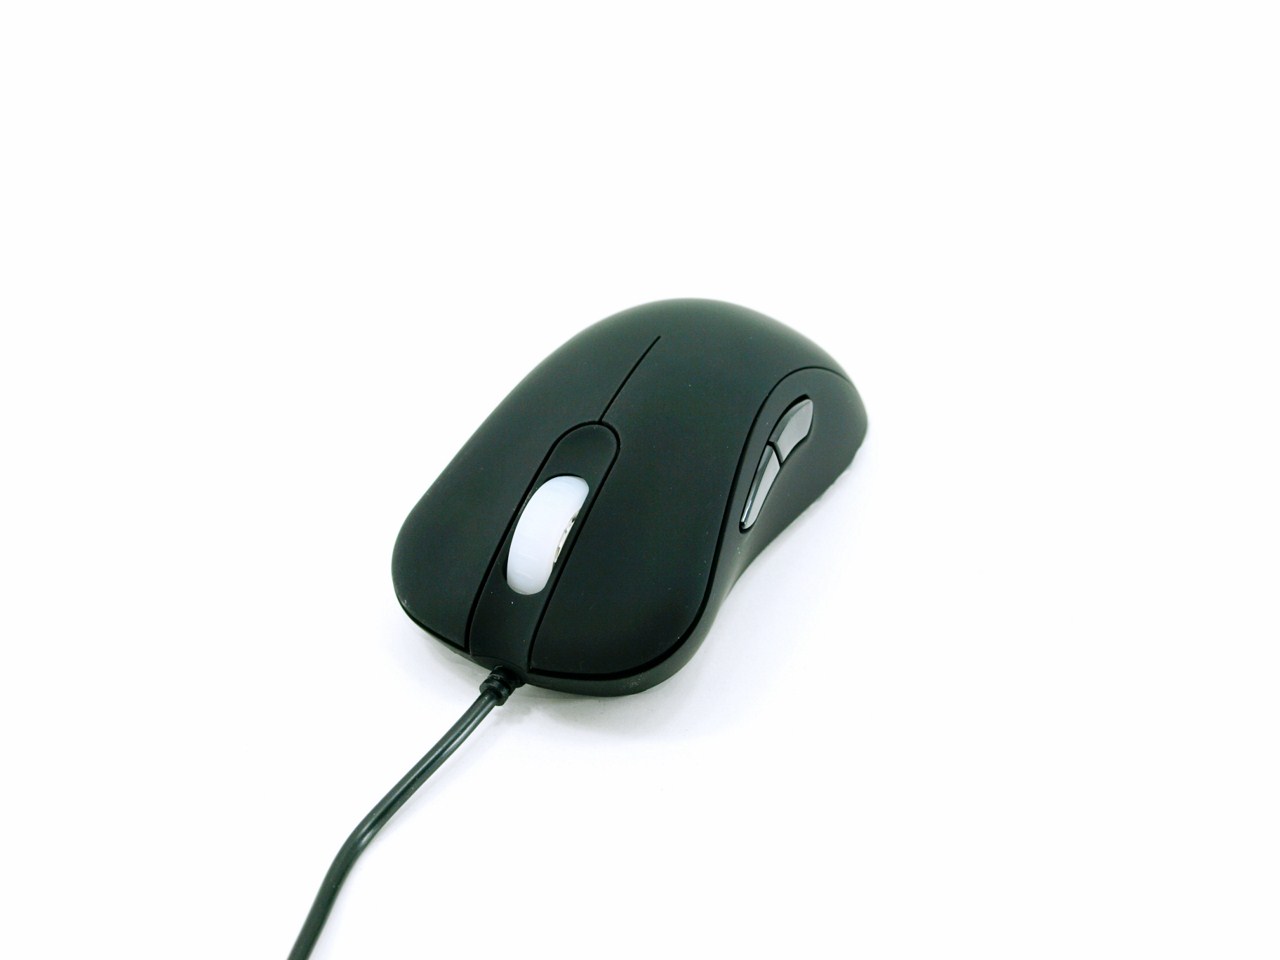 ZOWIE GEAR EC1 eVo Black Gaming Mouse Review